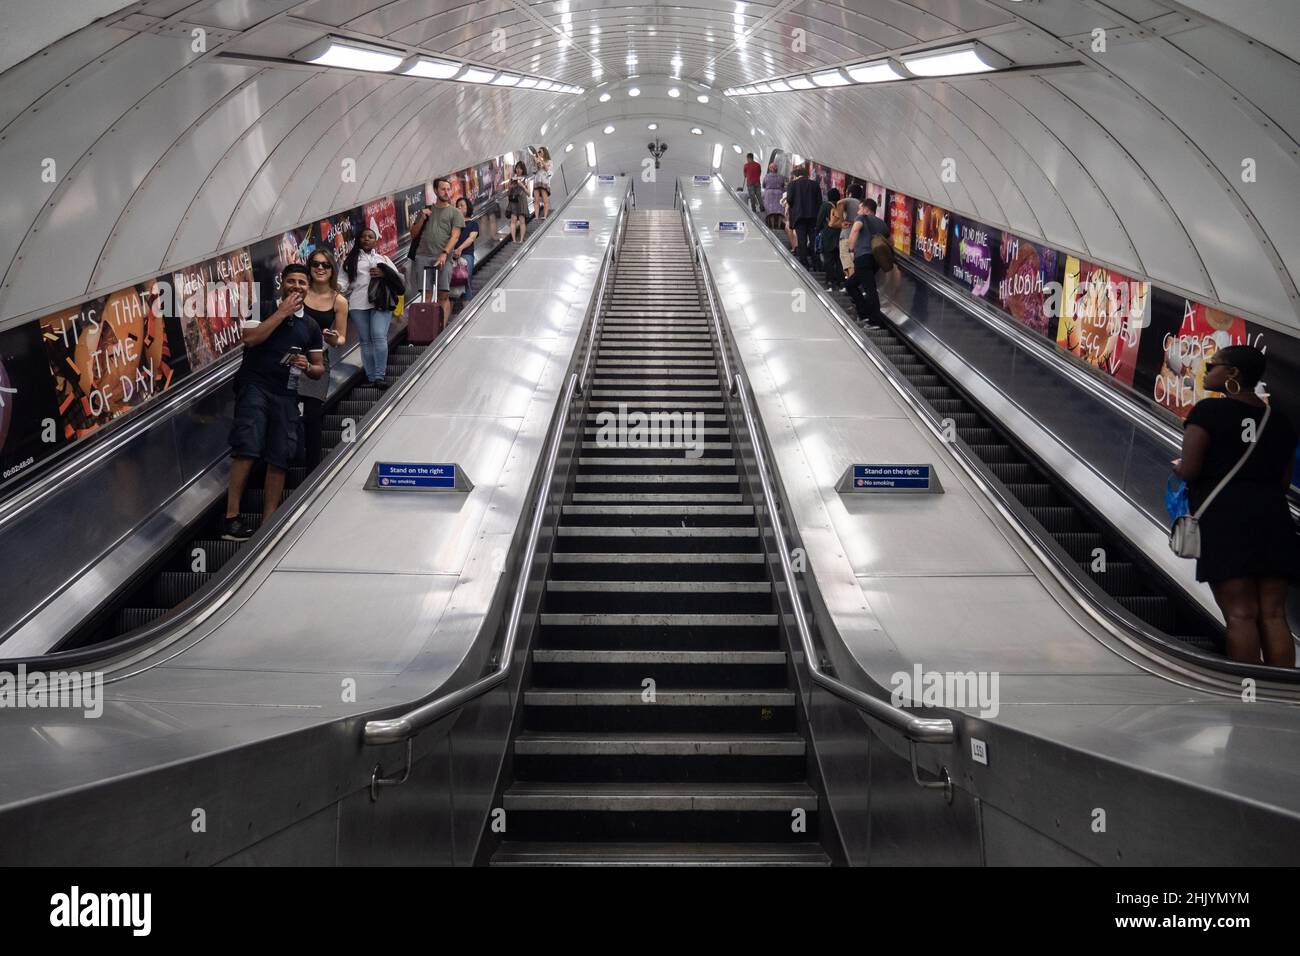 London Underground. Tourist and travellers on the escalators of the UK capital public transport system. Low angle symmetrical architecture view. Stock Photo